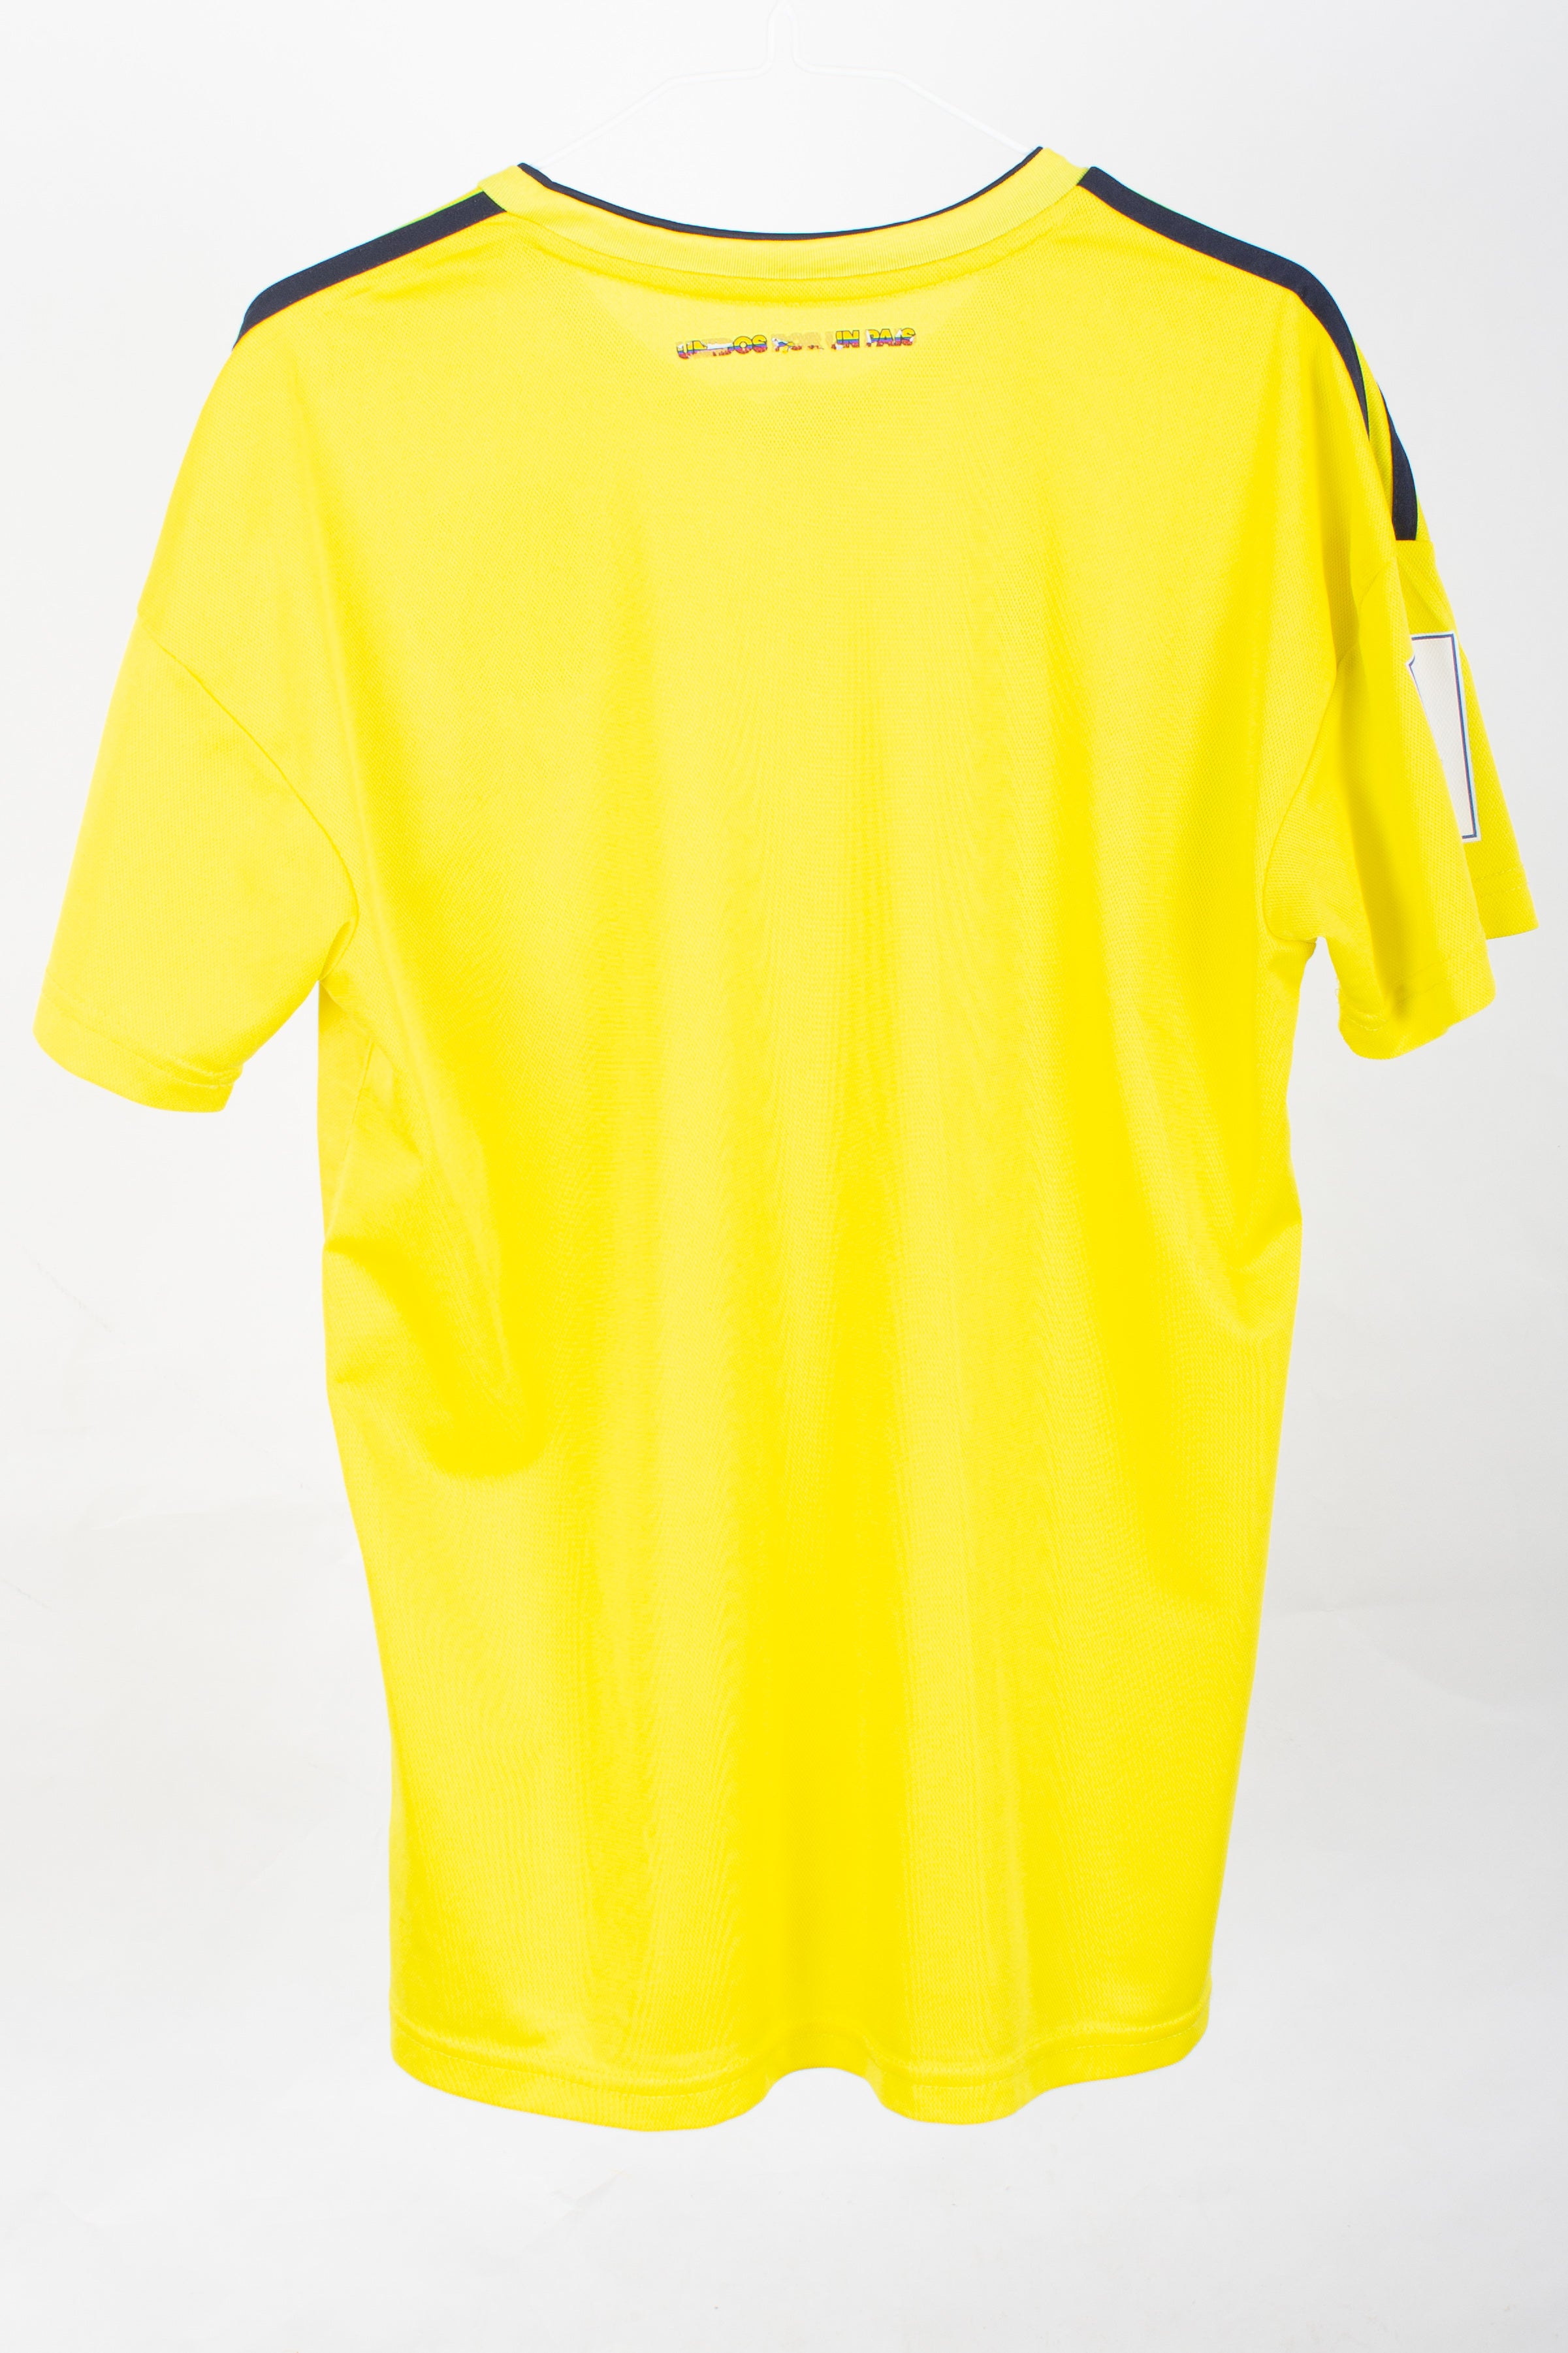 Colombia 2018 Home Shirt (M)